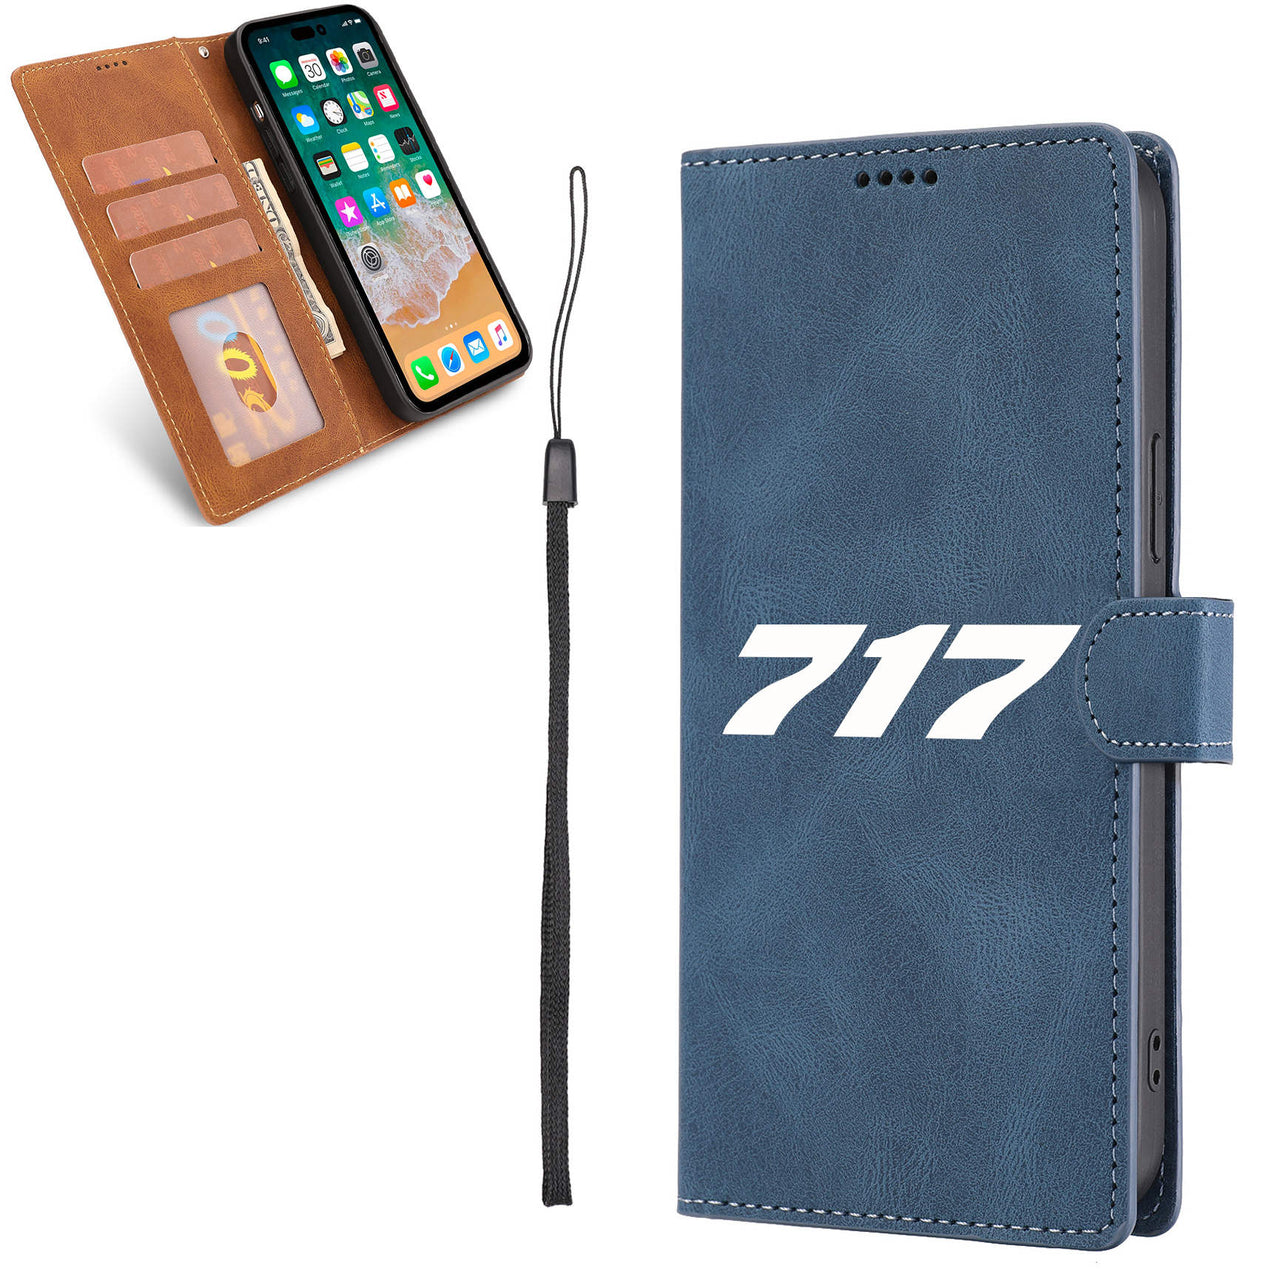 717 Flat Text Designed Leather iPhone Cases